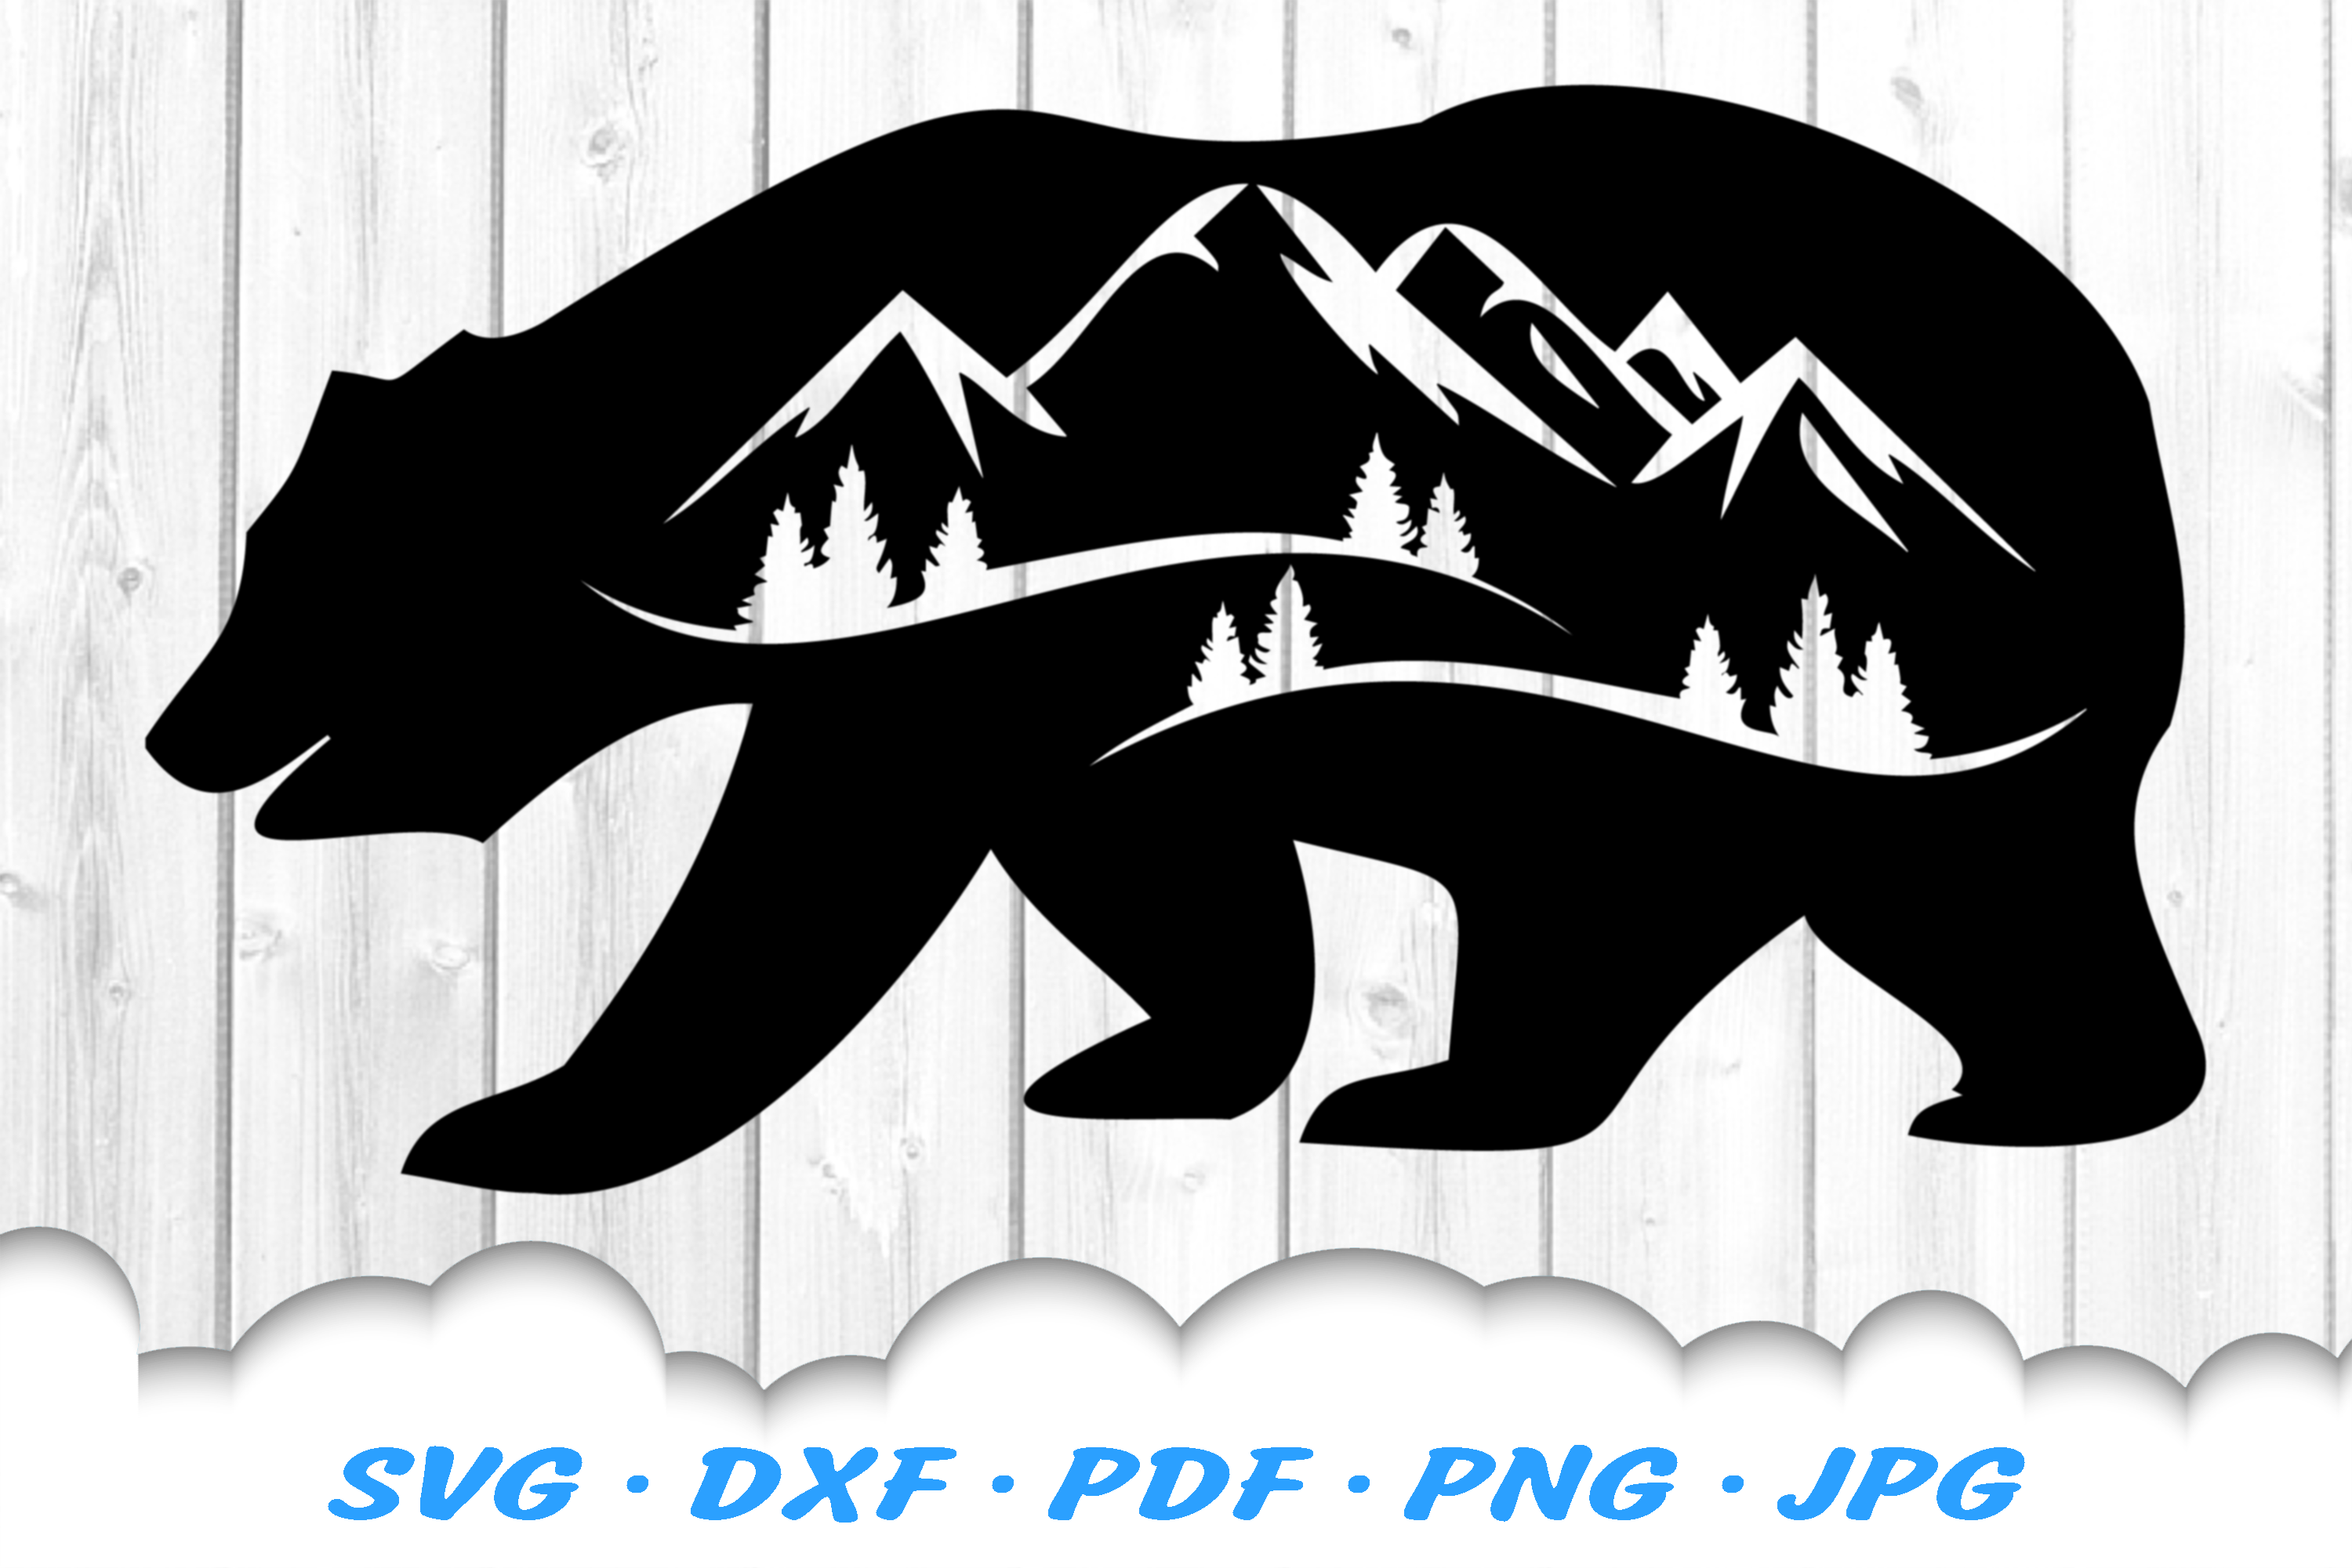 Bear Mountains Silhouette SVG DXF Cut Files (414935) | Illustrations